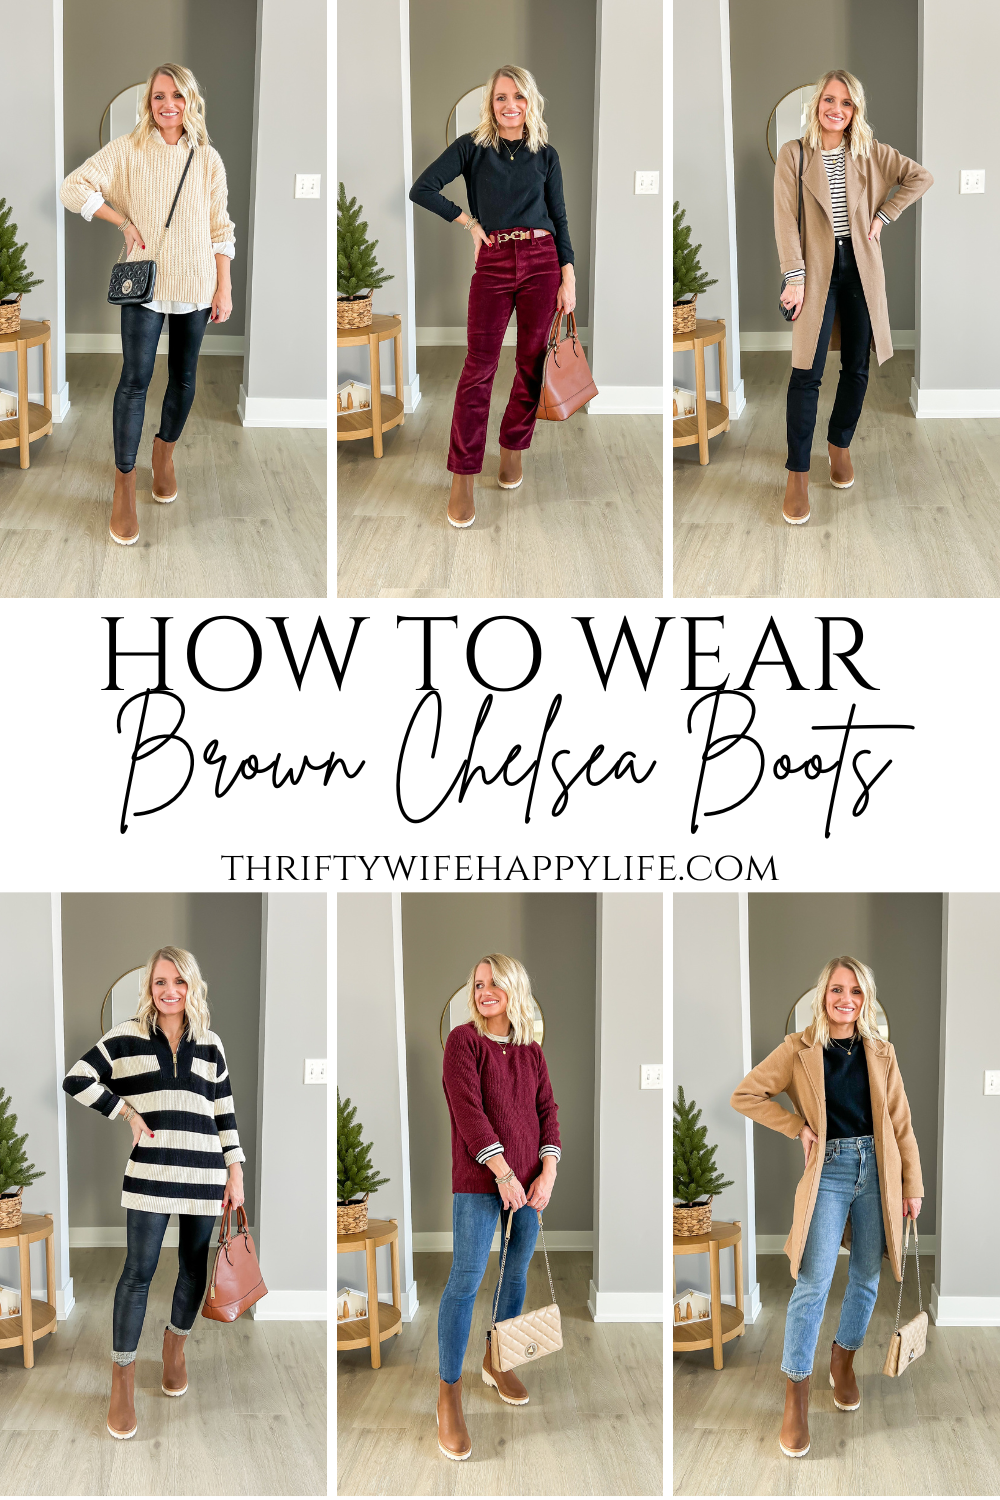 How to Wear Brown Chelsea Boots - Thrifty Wife Happy Life